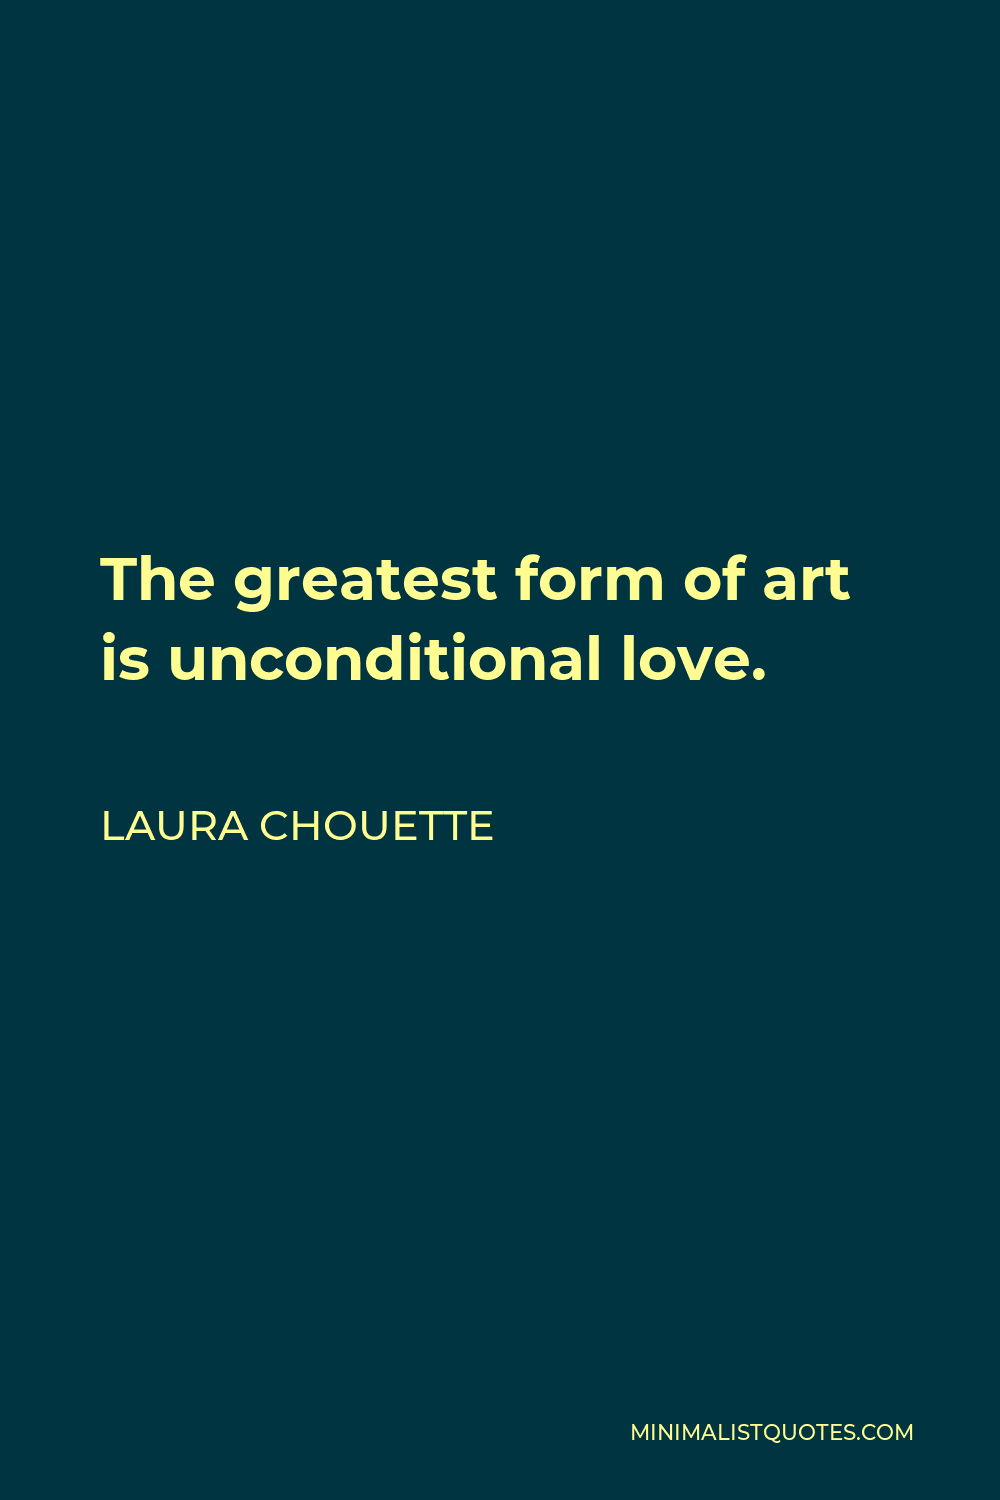 Laura Chouette Quote - The greatest form of art is unconditional love.